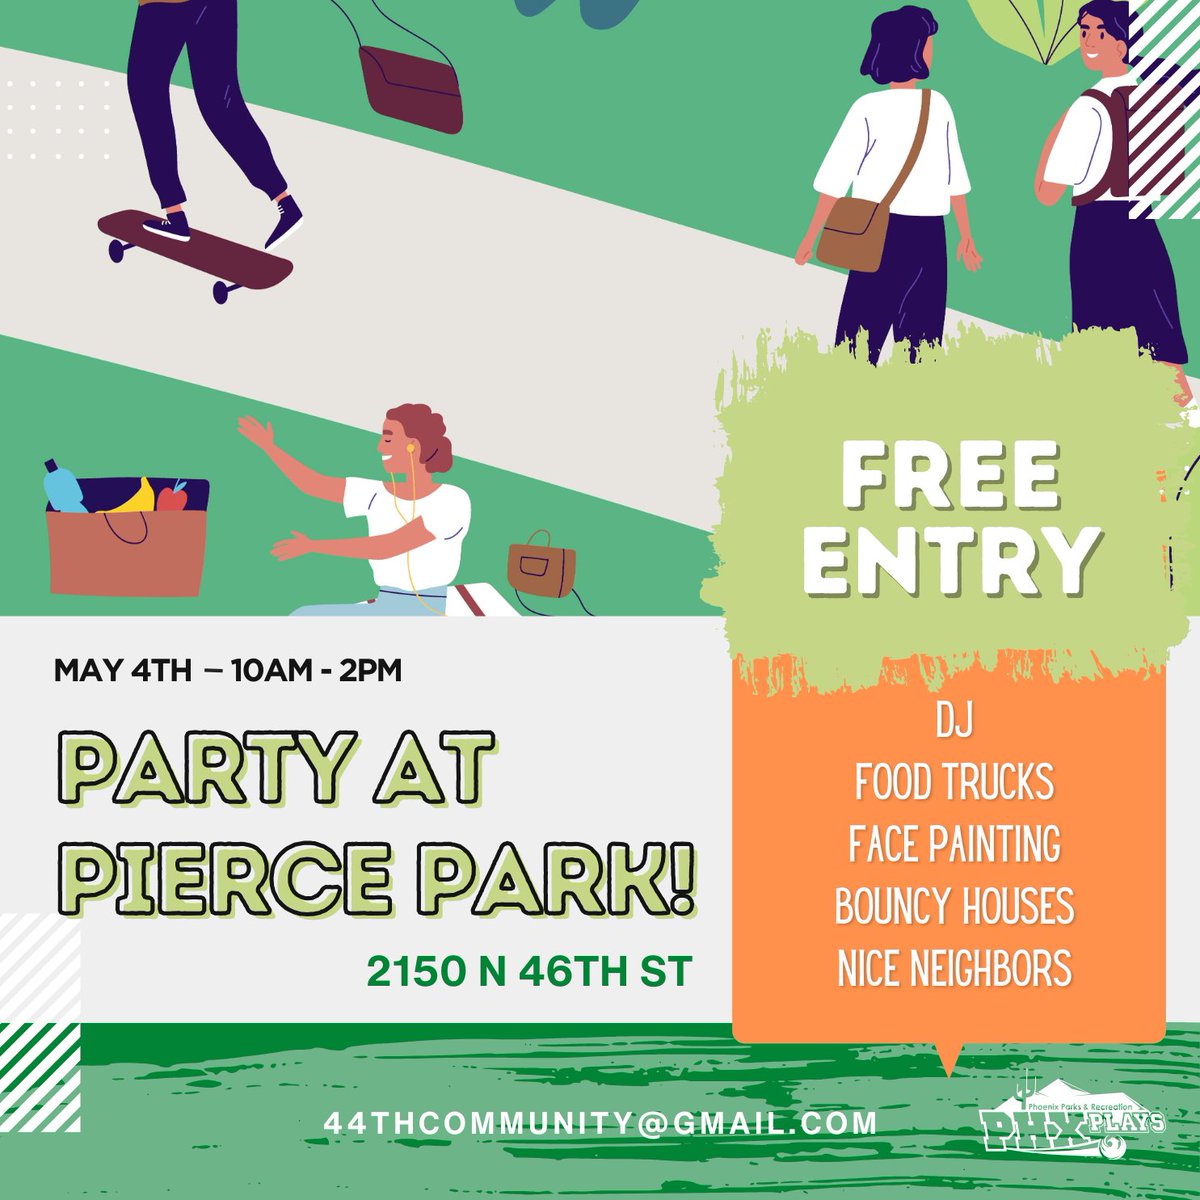 🎉 May 4th, 10am-2pm - Save the date! Pierce Park Party promises fun-filled activities, delicious food trucks, face painting, bouncy houses, and lively music. Can't wait! #phxplays #phxparks 🎈 📍 Pierce Park, 2150 N 46th St, Phoenix, AZ 85008 ⏰ May 4th, 10AM-2PM